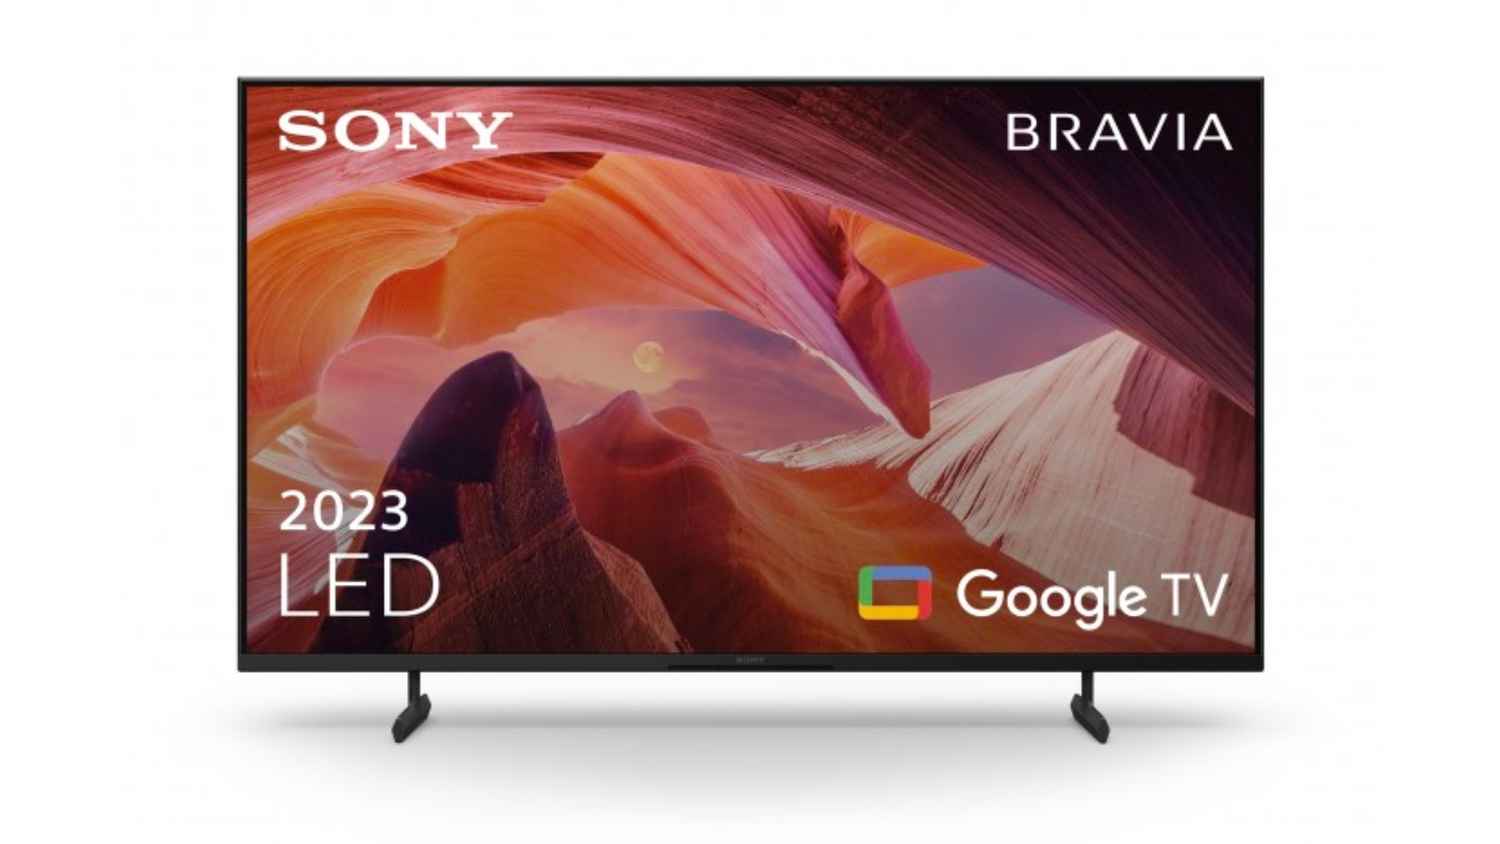 Sony Bravia X80L TV launched in India with these 5 standout features